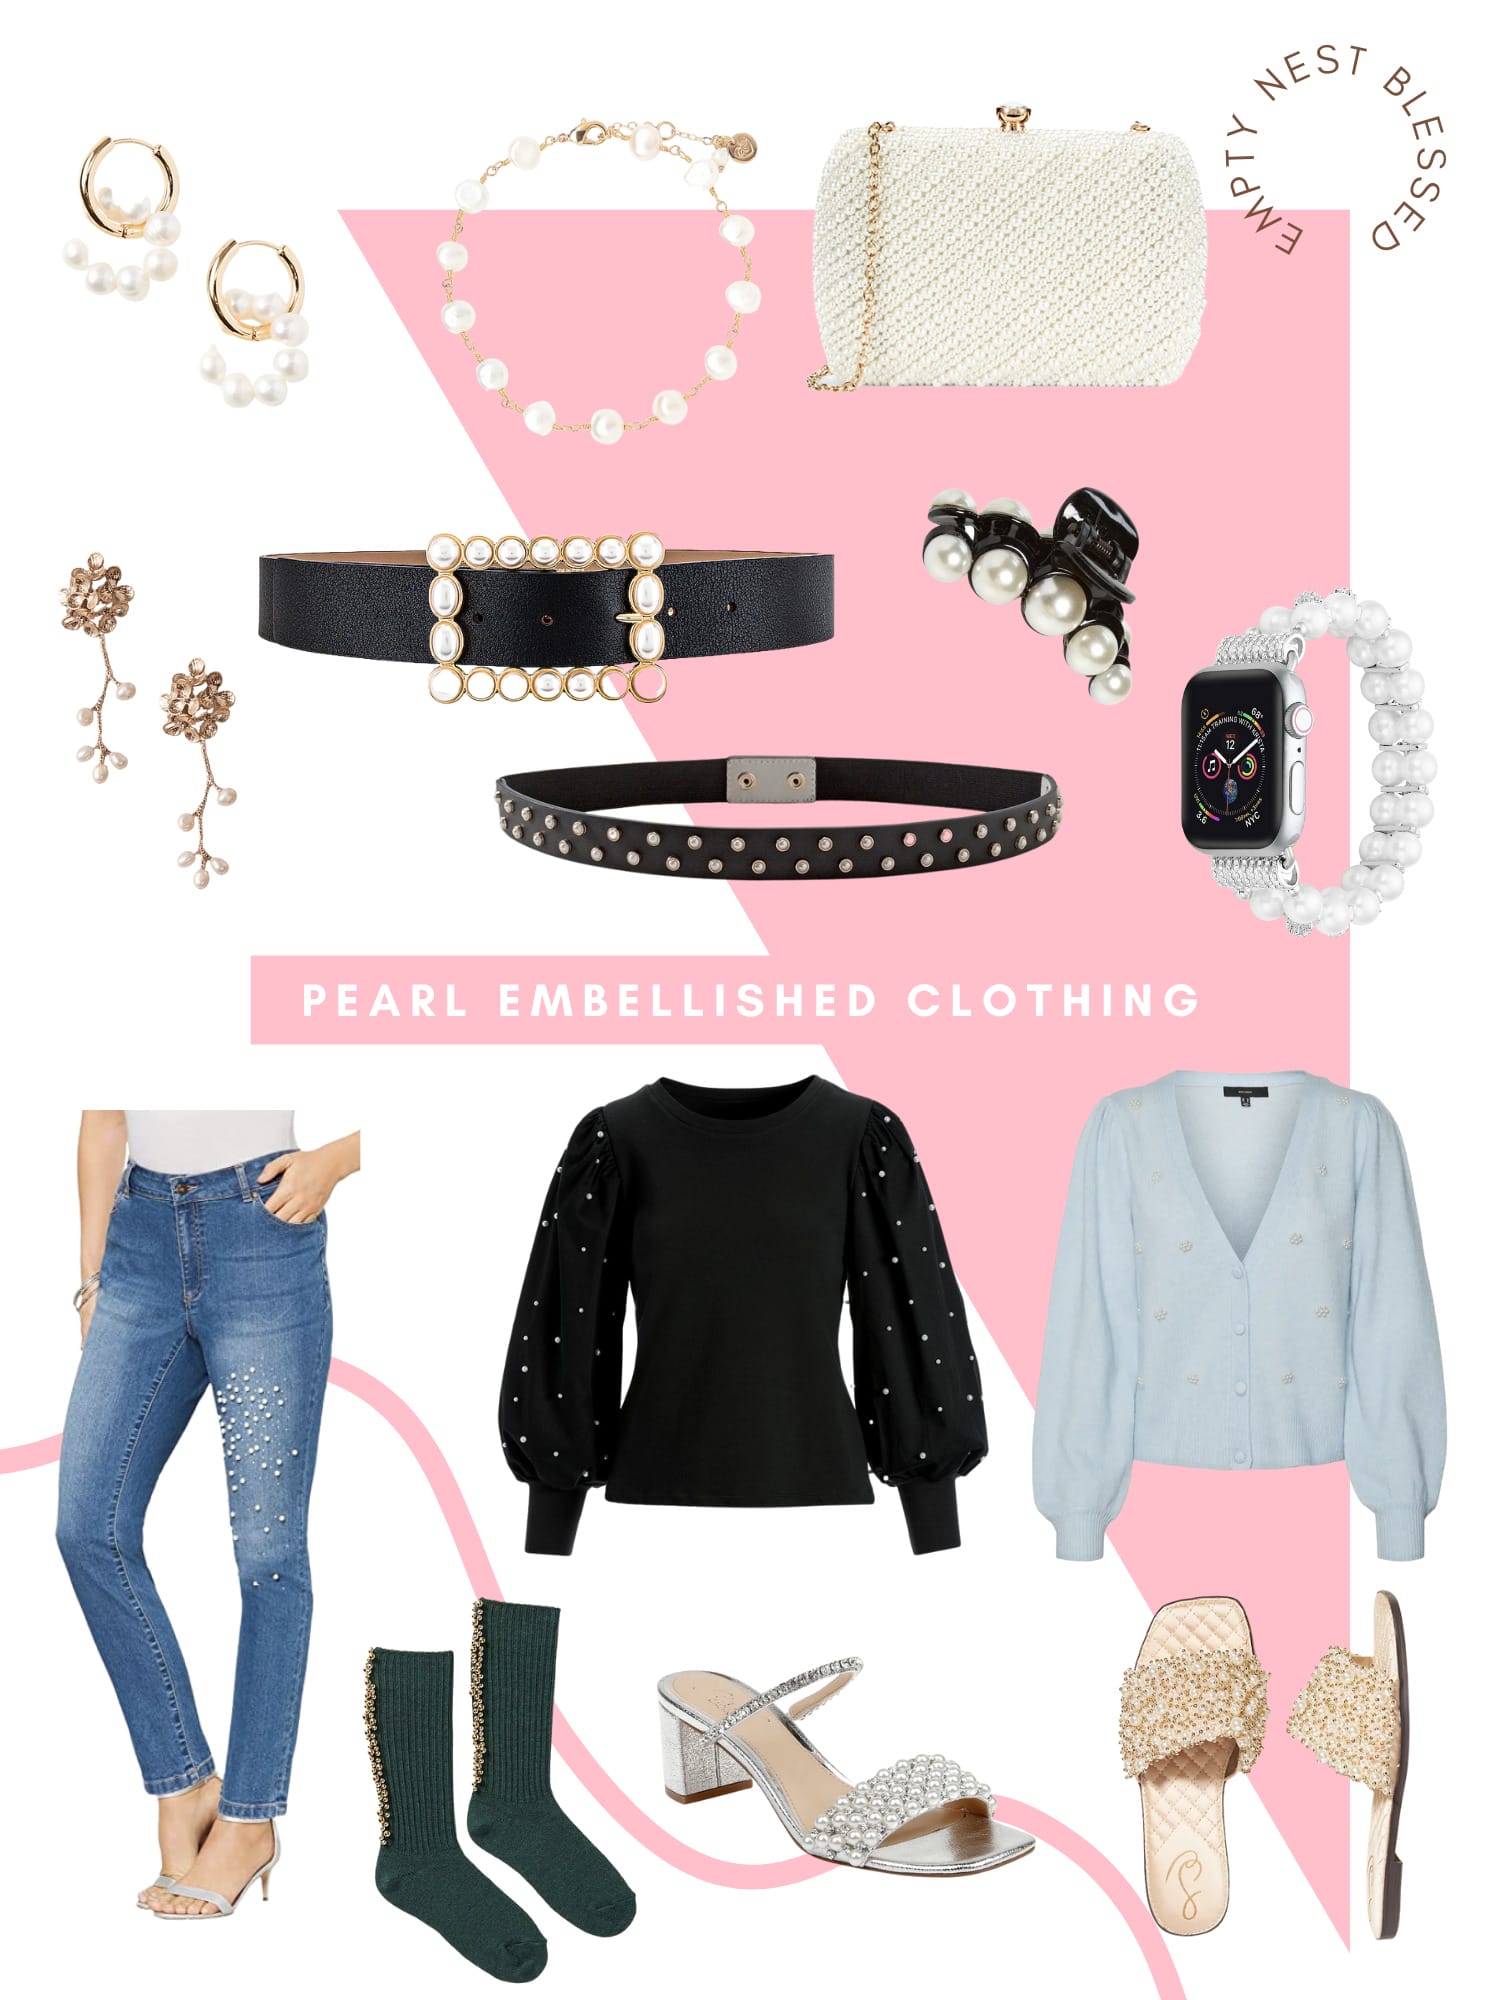 Pearl Embellished Clothing  5 Pretty Ways to Wear the Trend